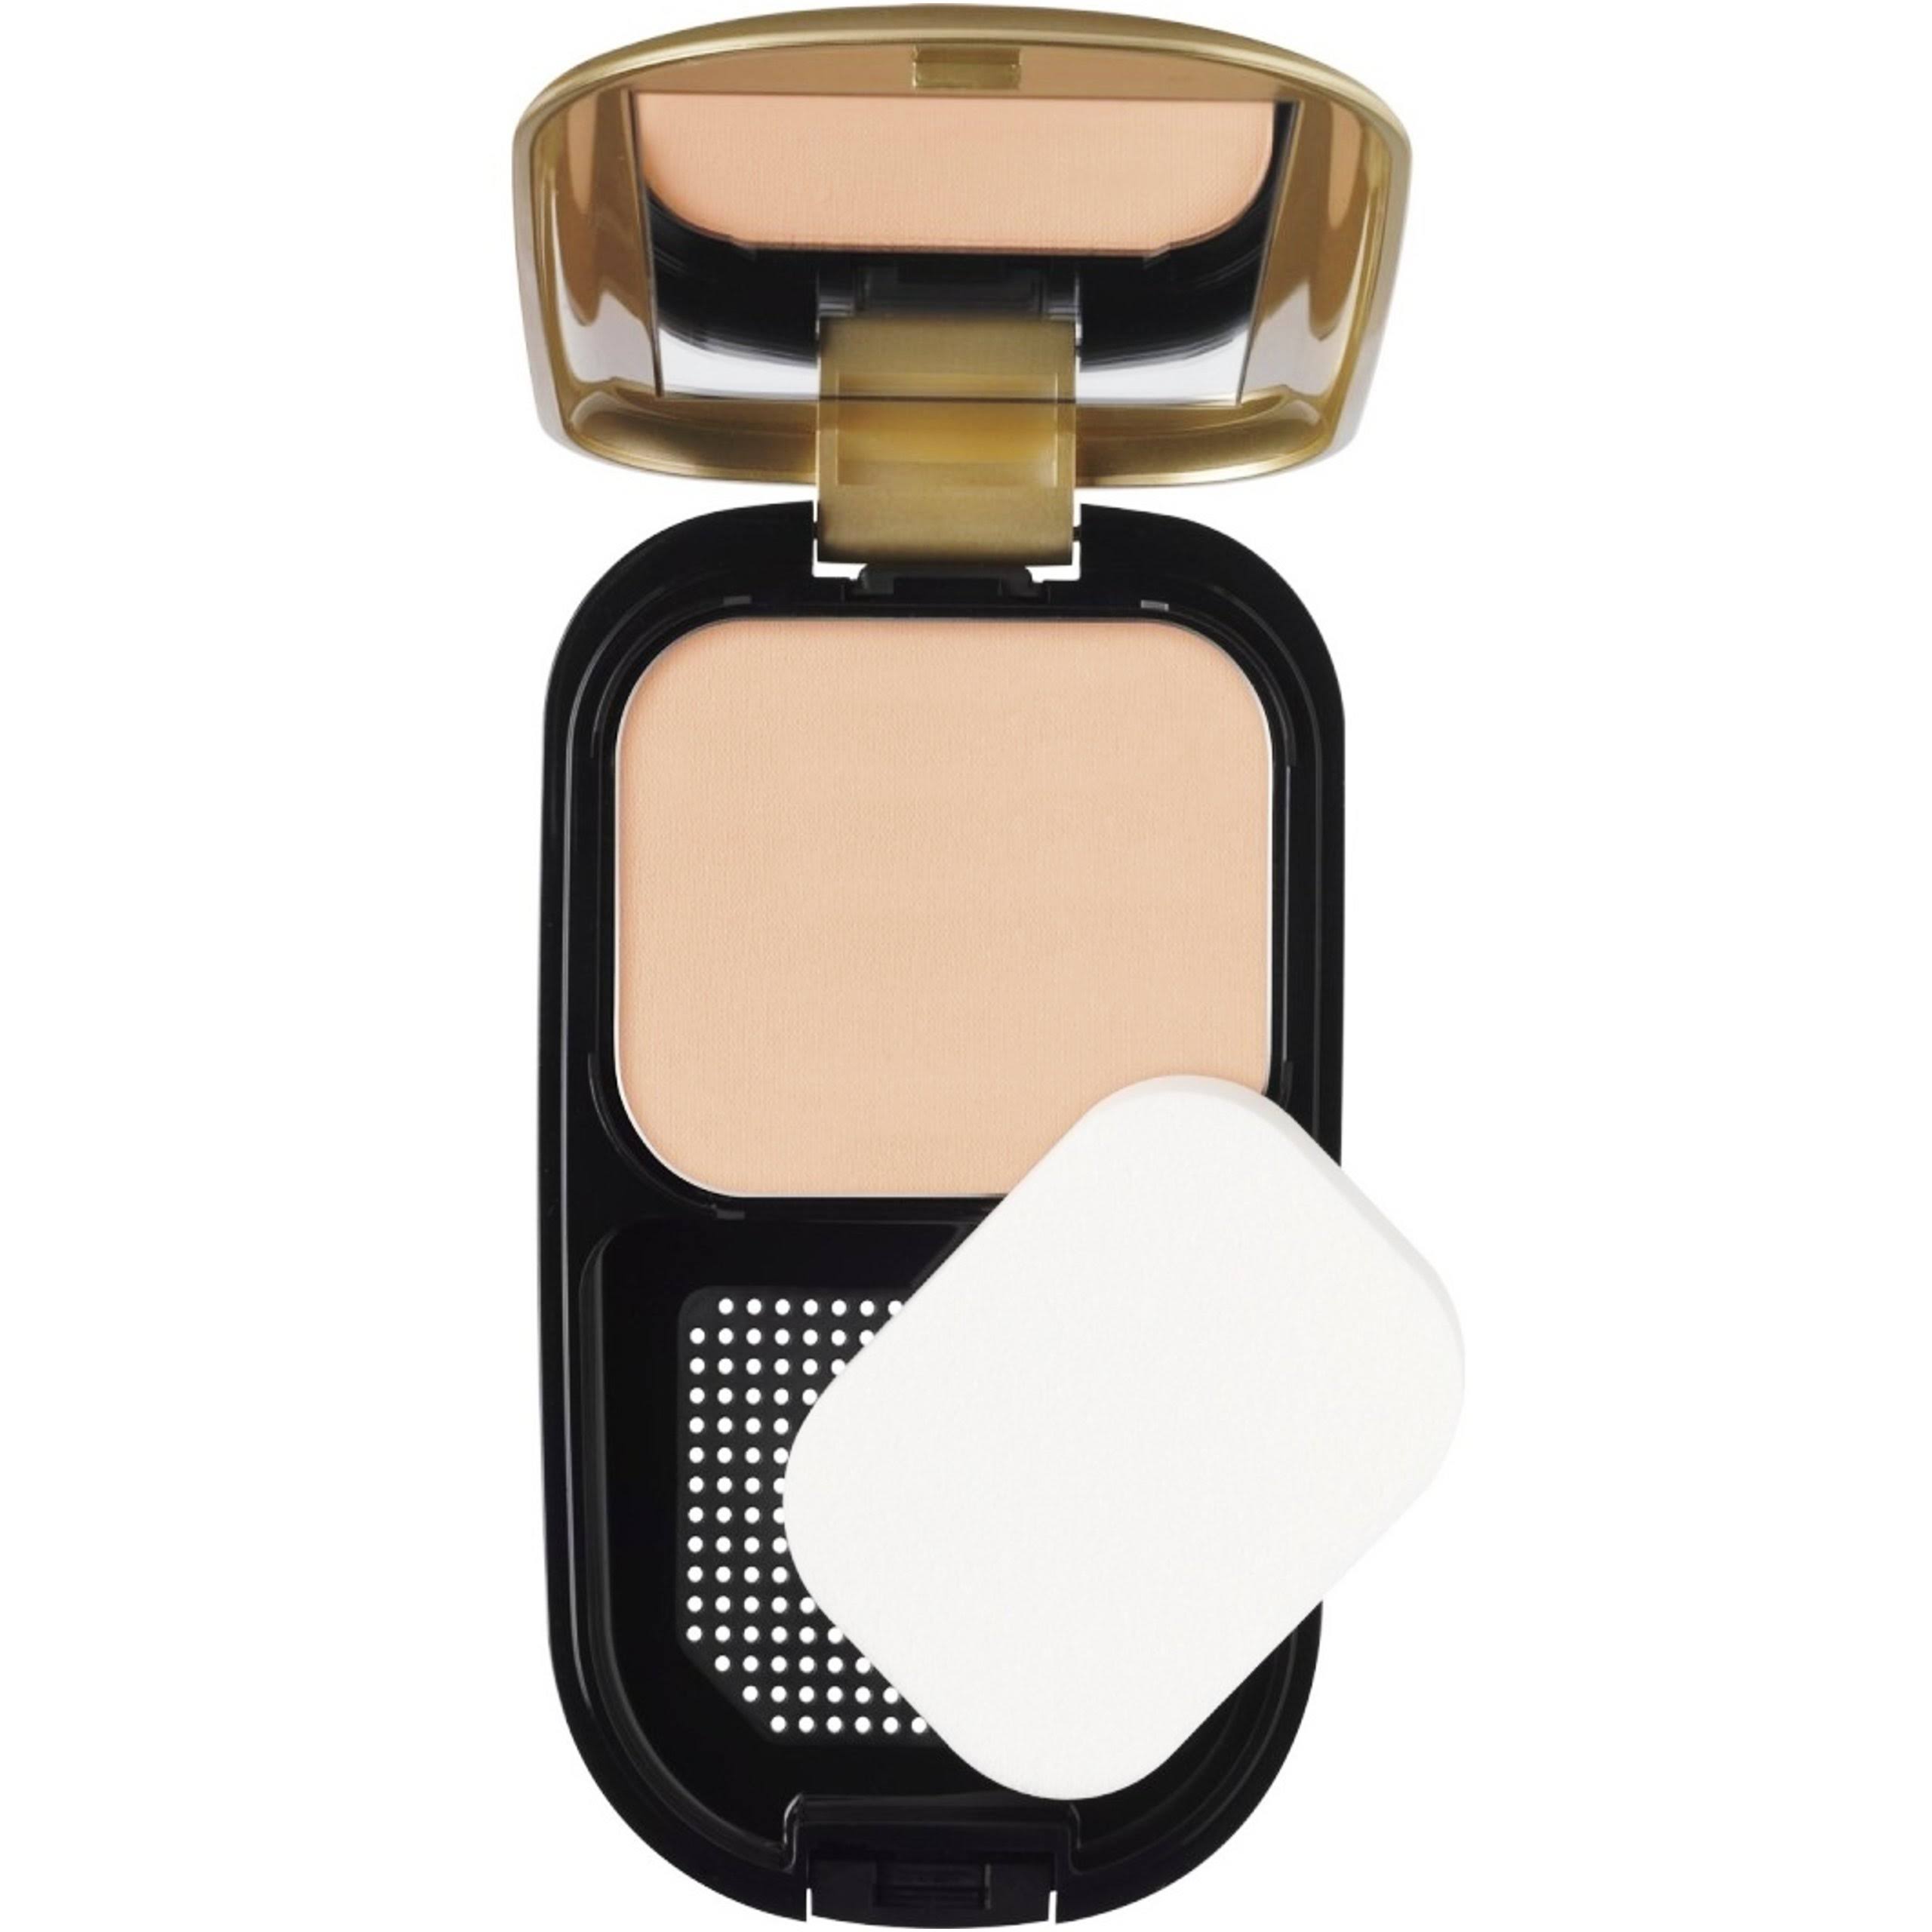 Max Factor Facefinity Compact Foundation - 003 Natural, 10g, SPF 20